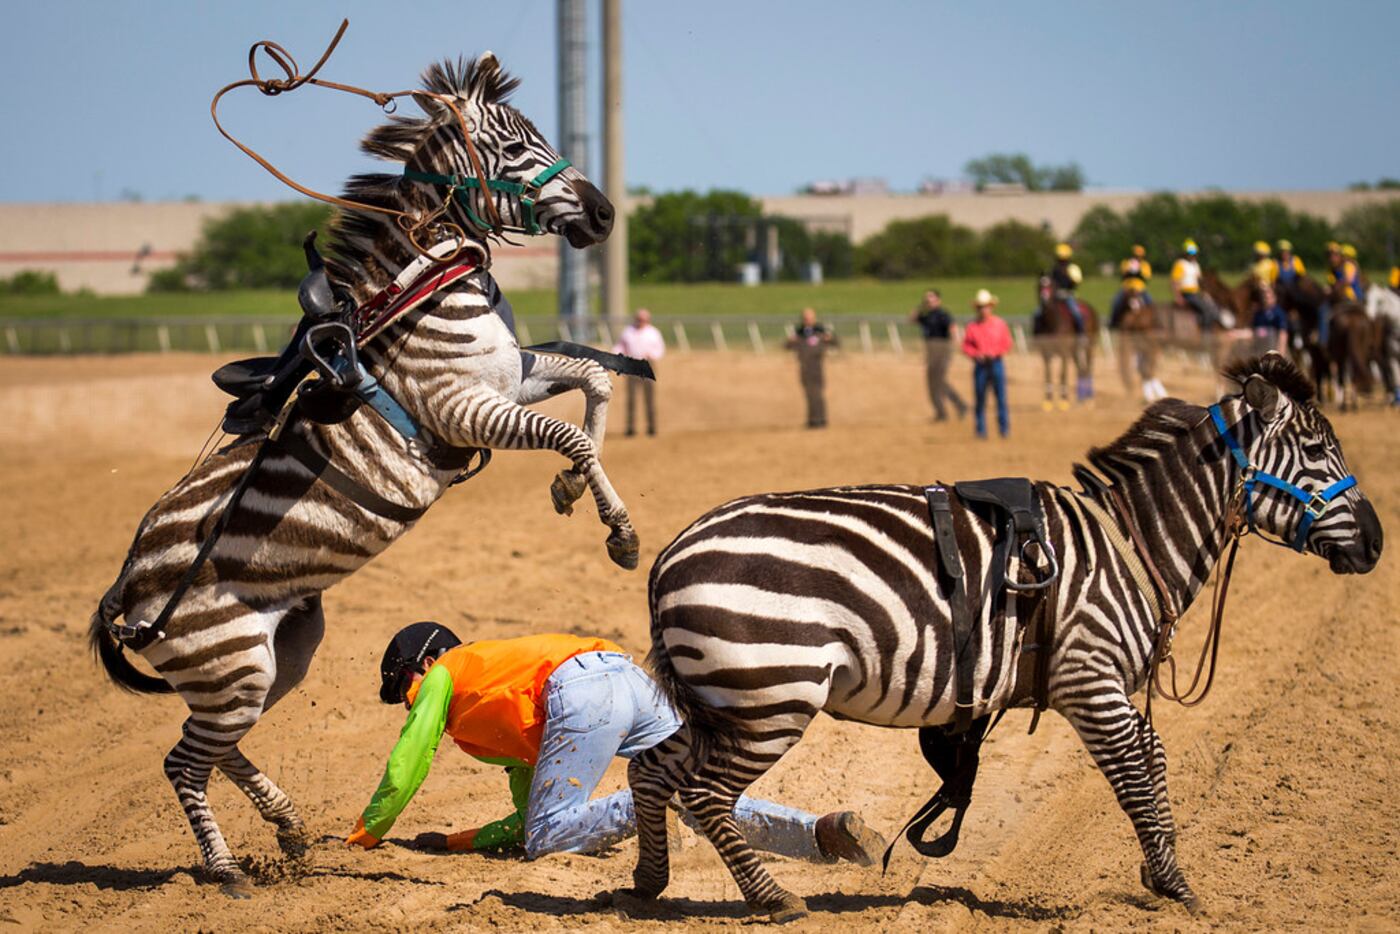 Jockey Fernando Guerra falls from a zebra during "Extreme Racing" at Lone Star Park on...